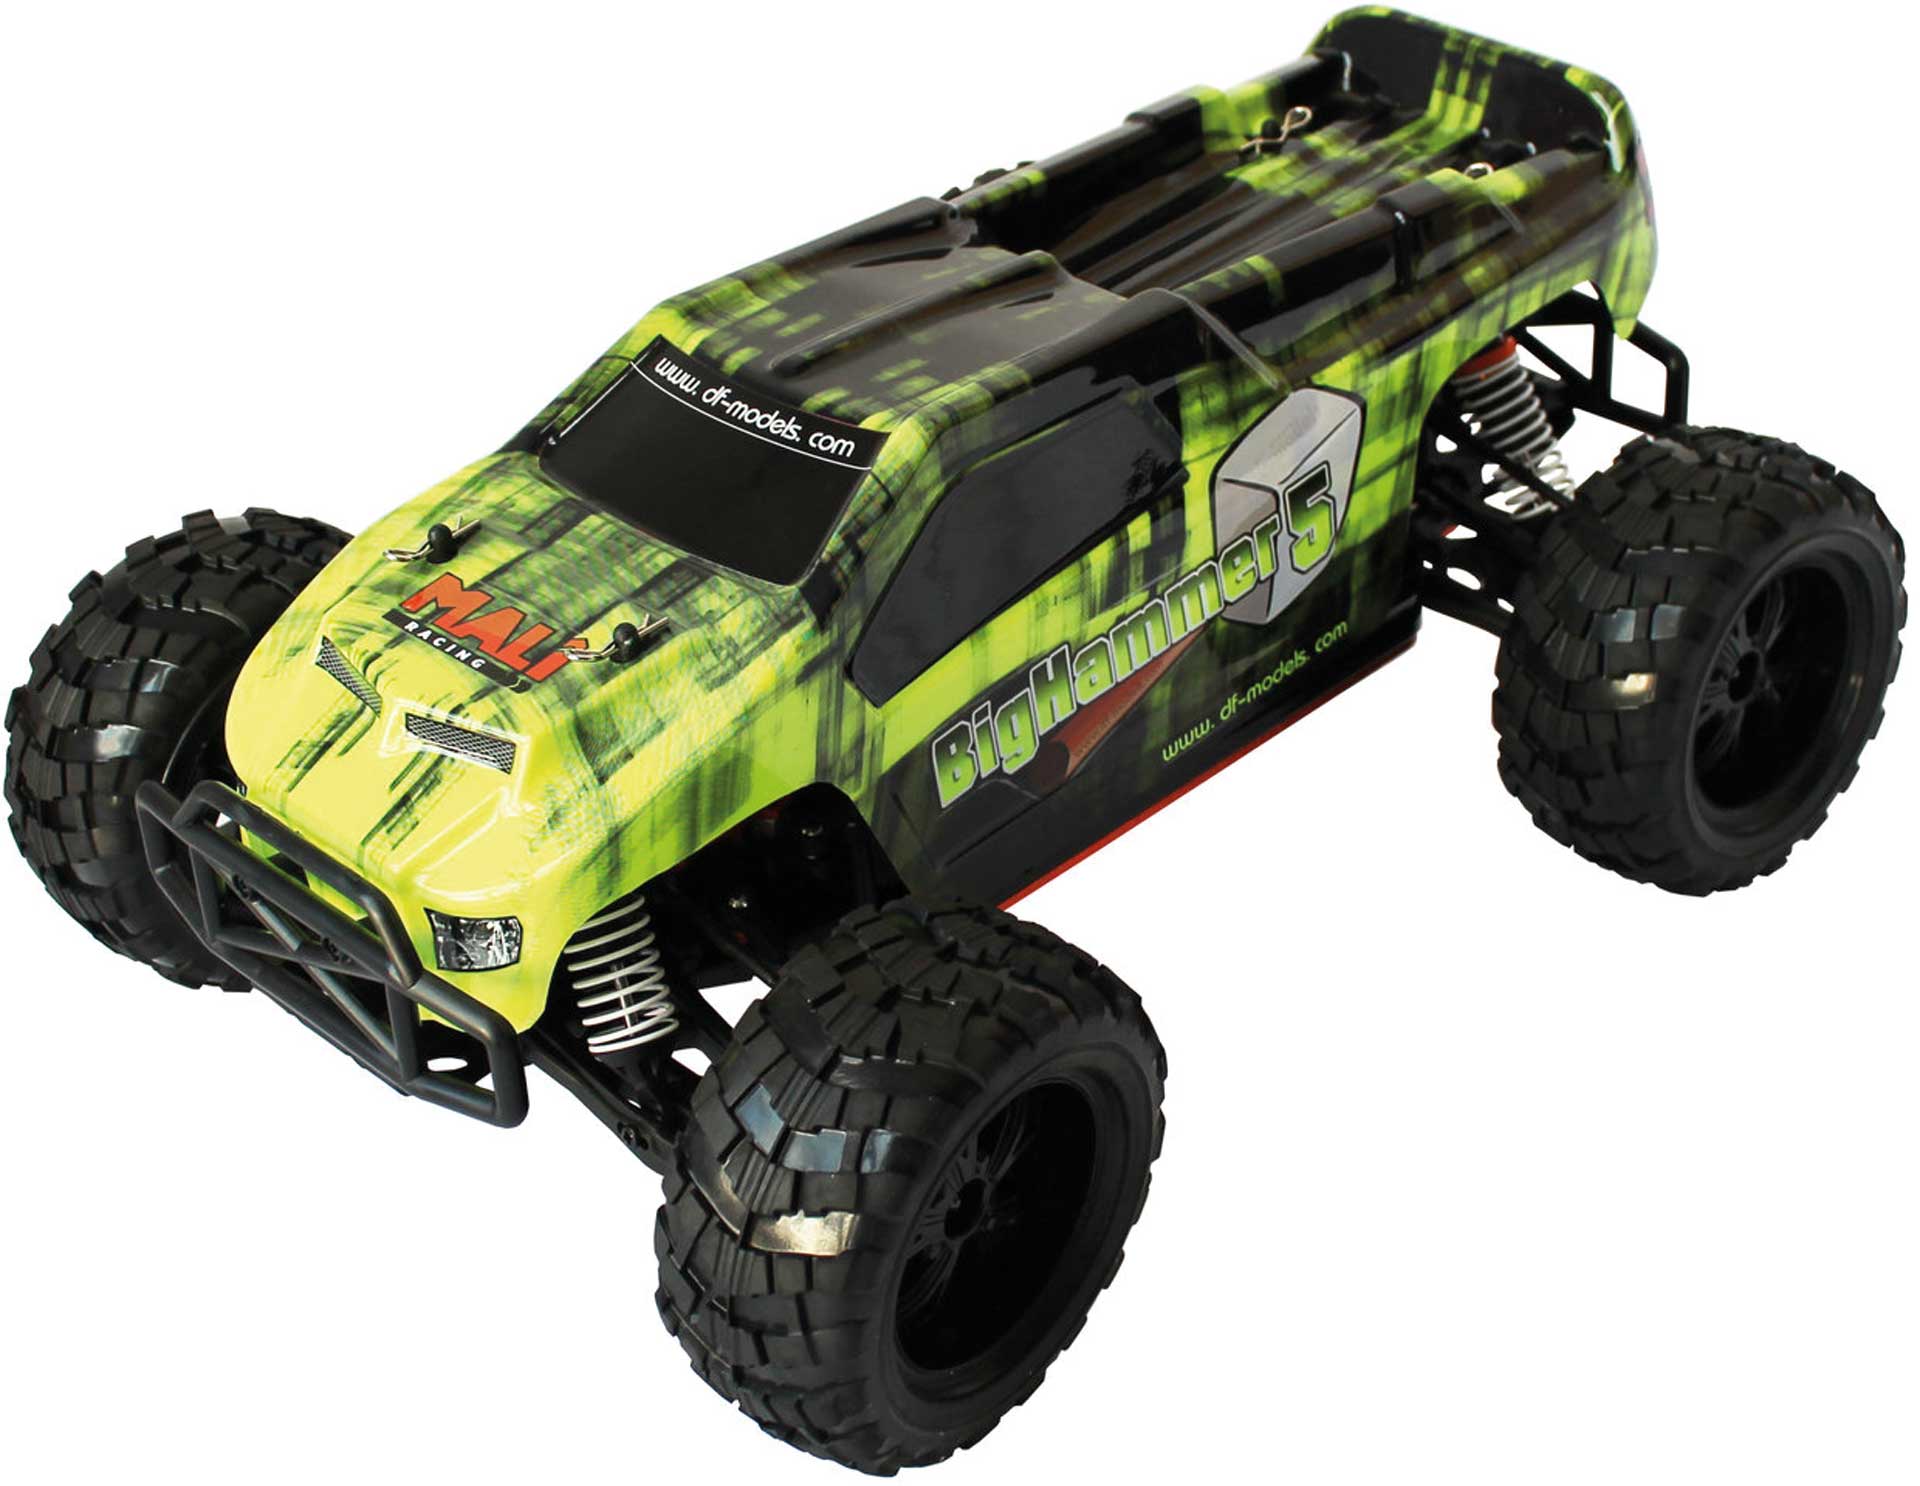 DRIVE & FLY MODELS BIGHAMMER 5 1/10XL RTR BRUSHED 4WD